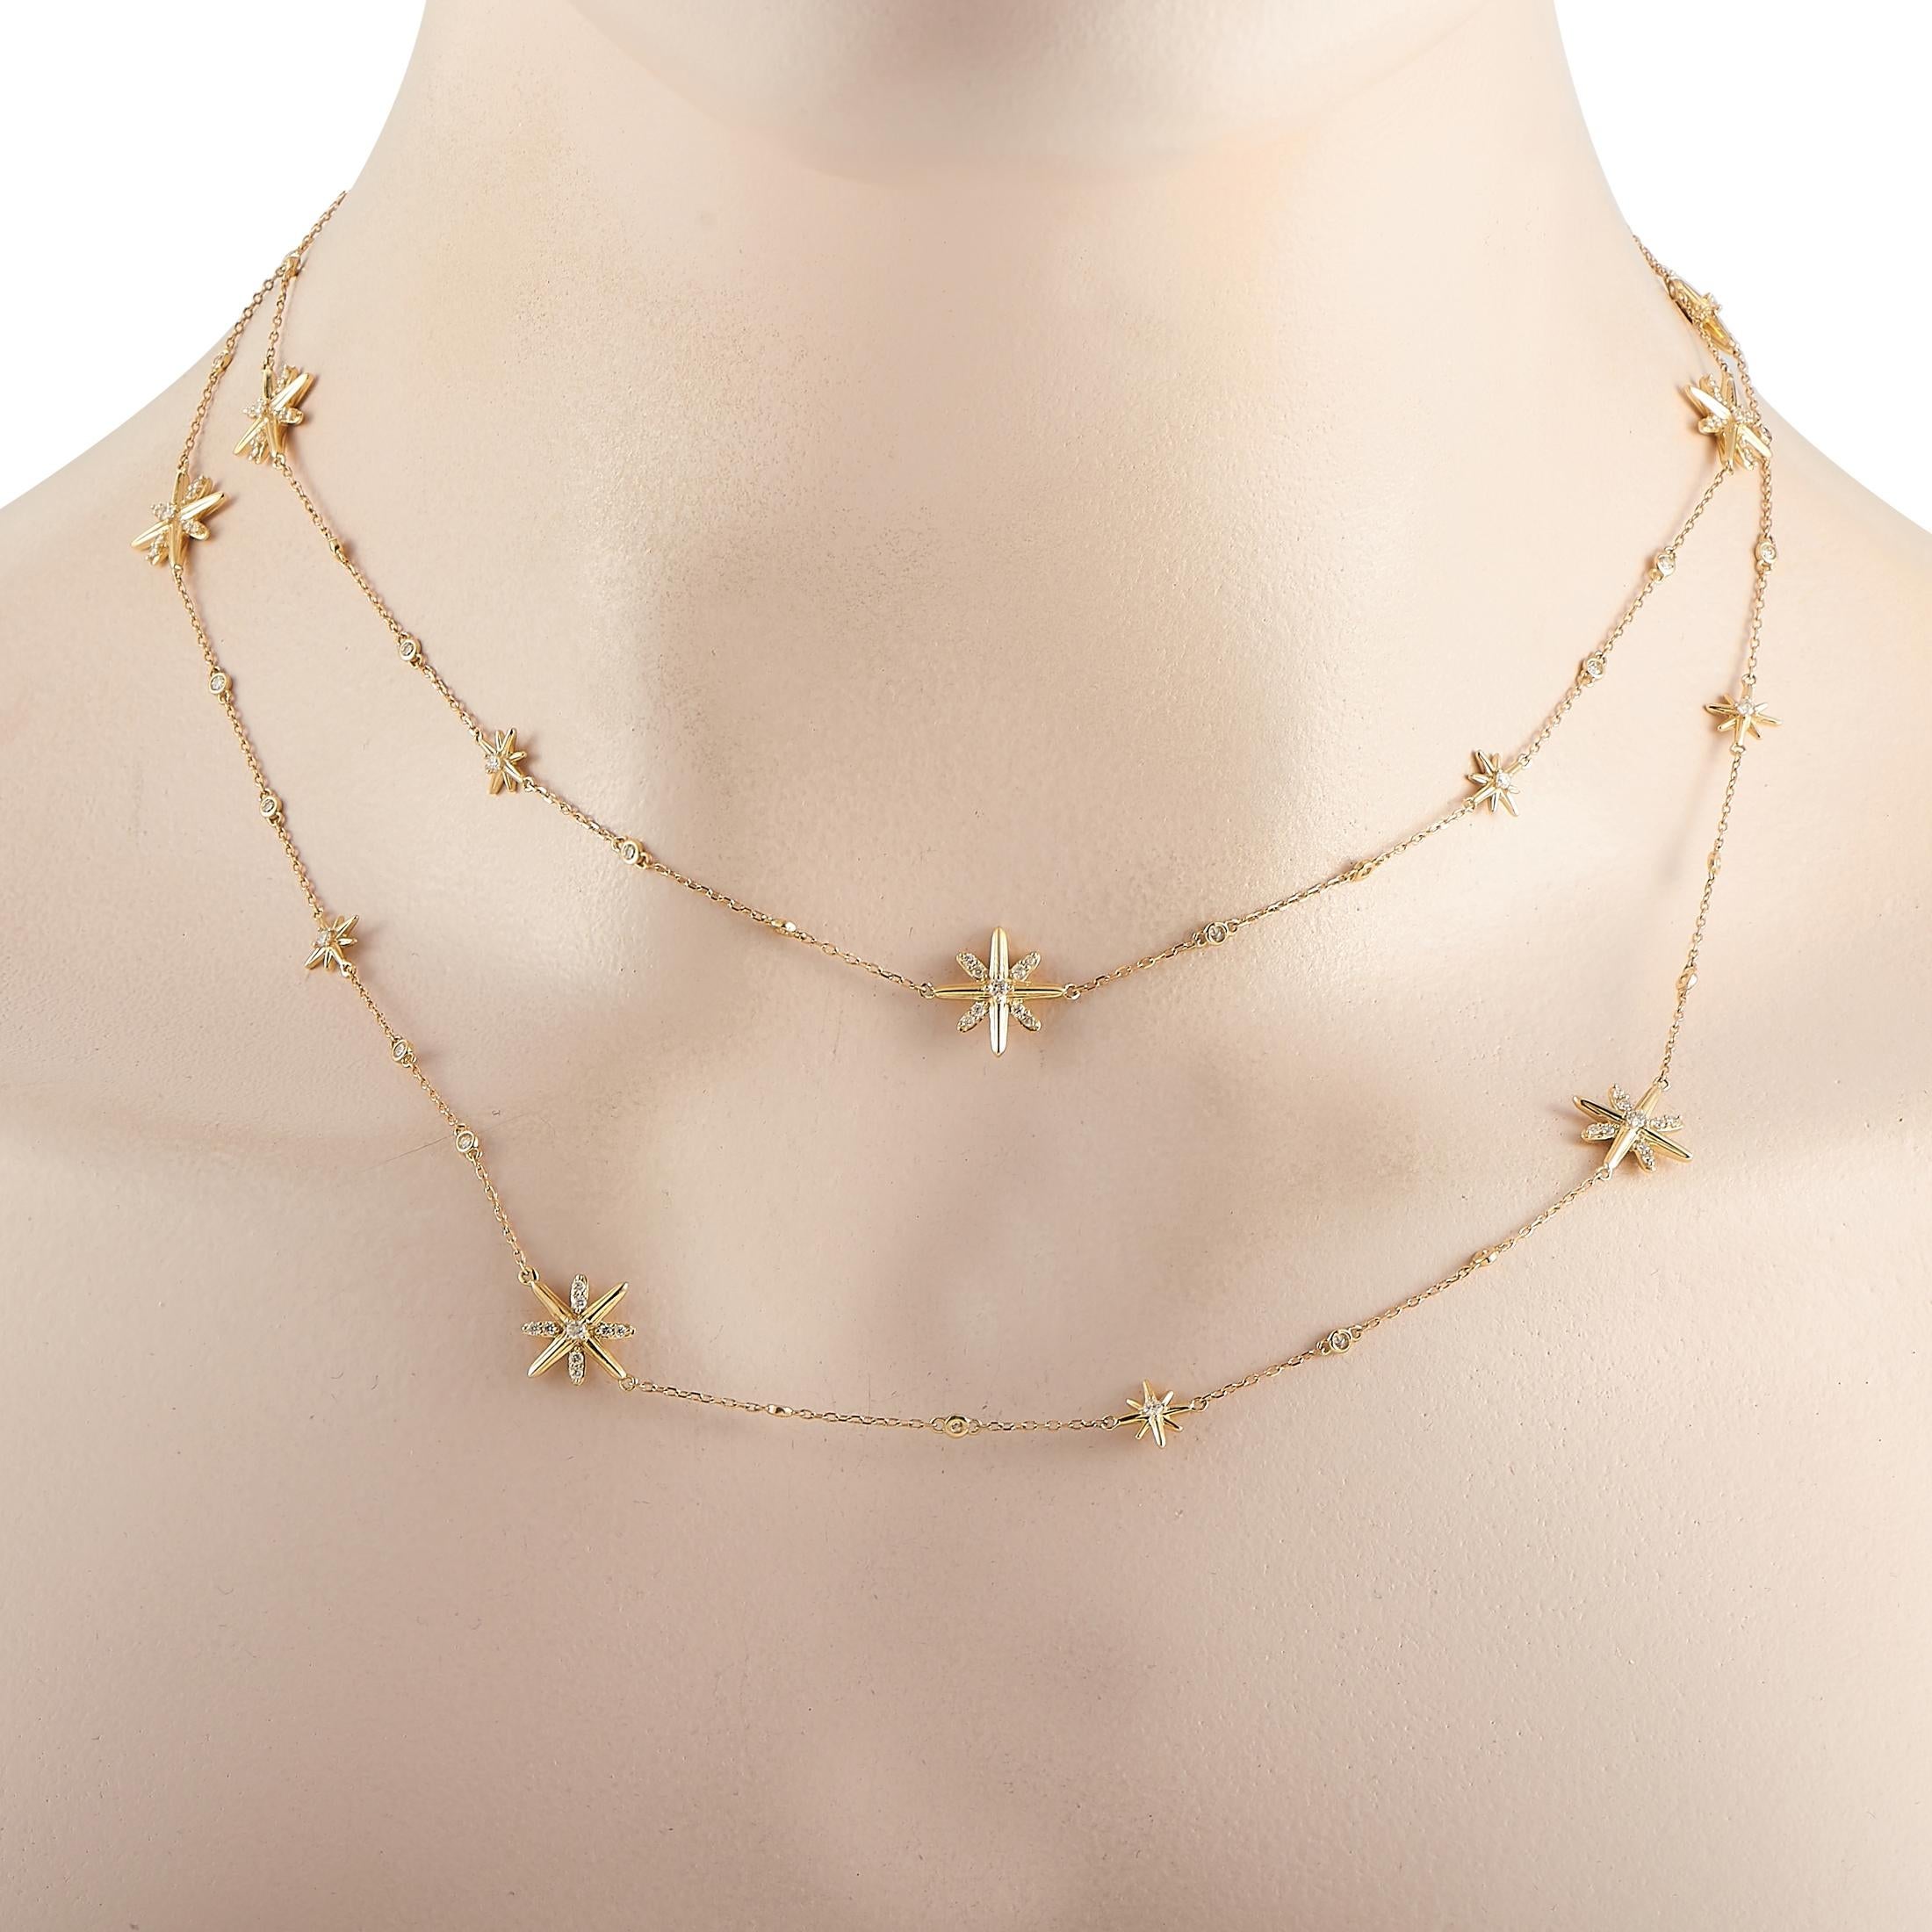 This radiant necklace will effortlessly elevate any ensemble and help you make a spectacular statement. Measuring 35” long, this 14K yellow gold necklace is dotted with stylish starburst accents. Shimmering diamonds totaling 1.00 carats make this